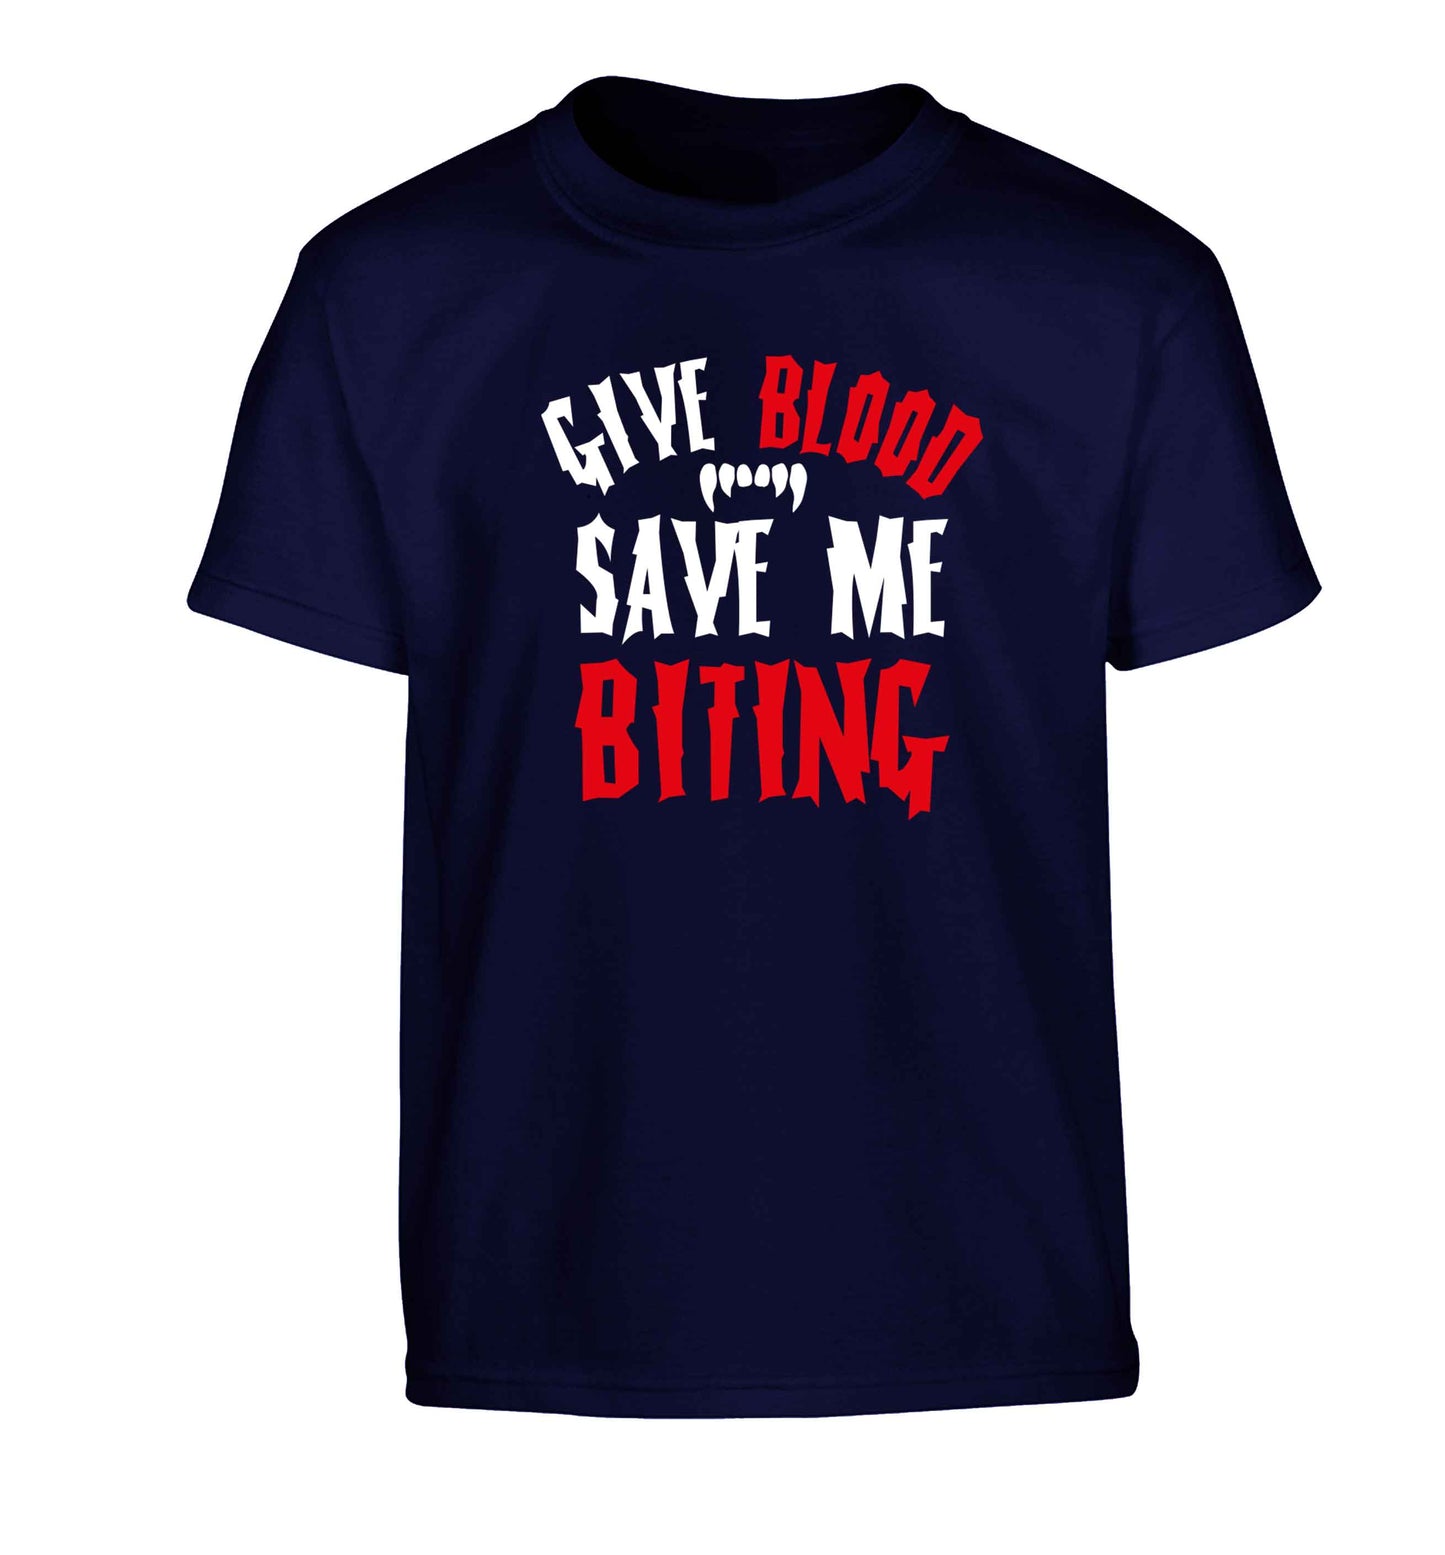 Give blood save me biting Children's navy Tshirt 12-13 Years